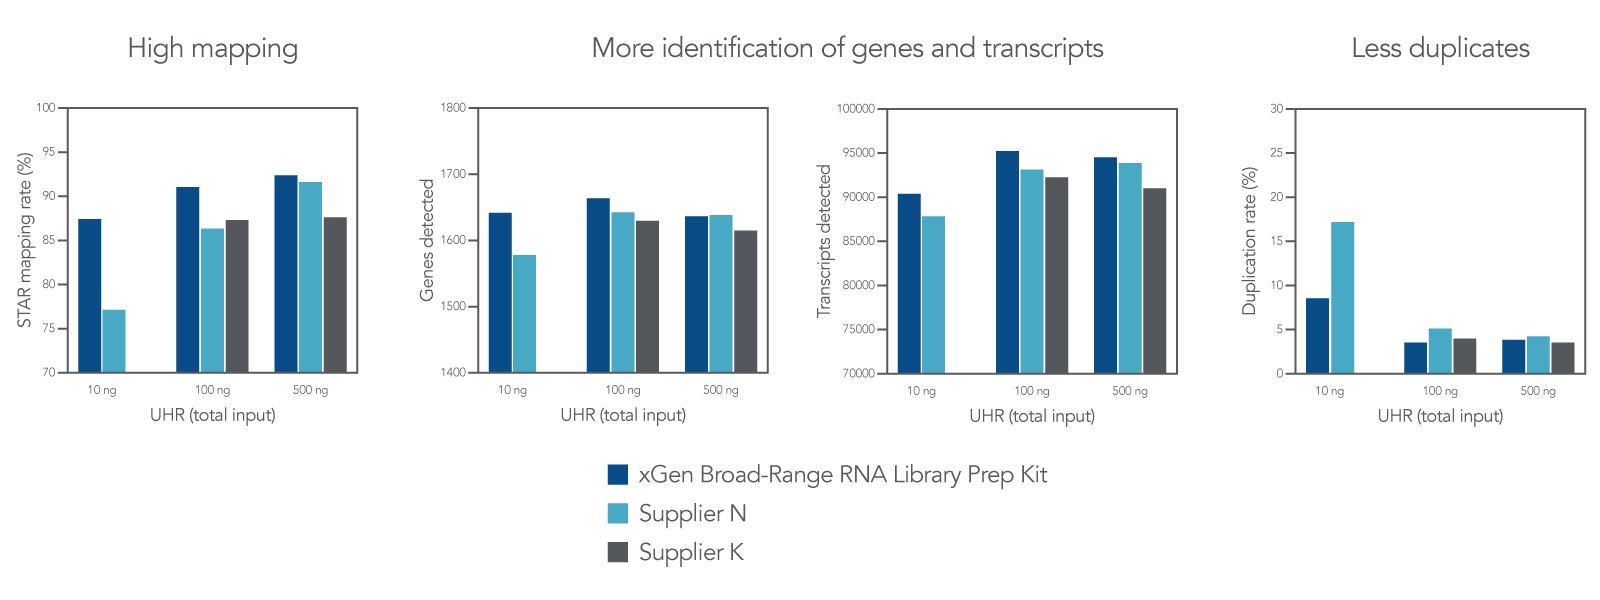 IDT RNA-seq results from xGen Broad-Range RNA Library Prep have high mapping percentage and fewer duplicates.